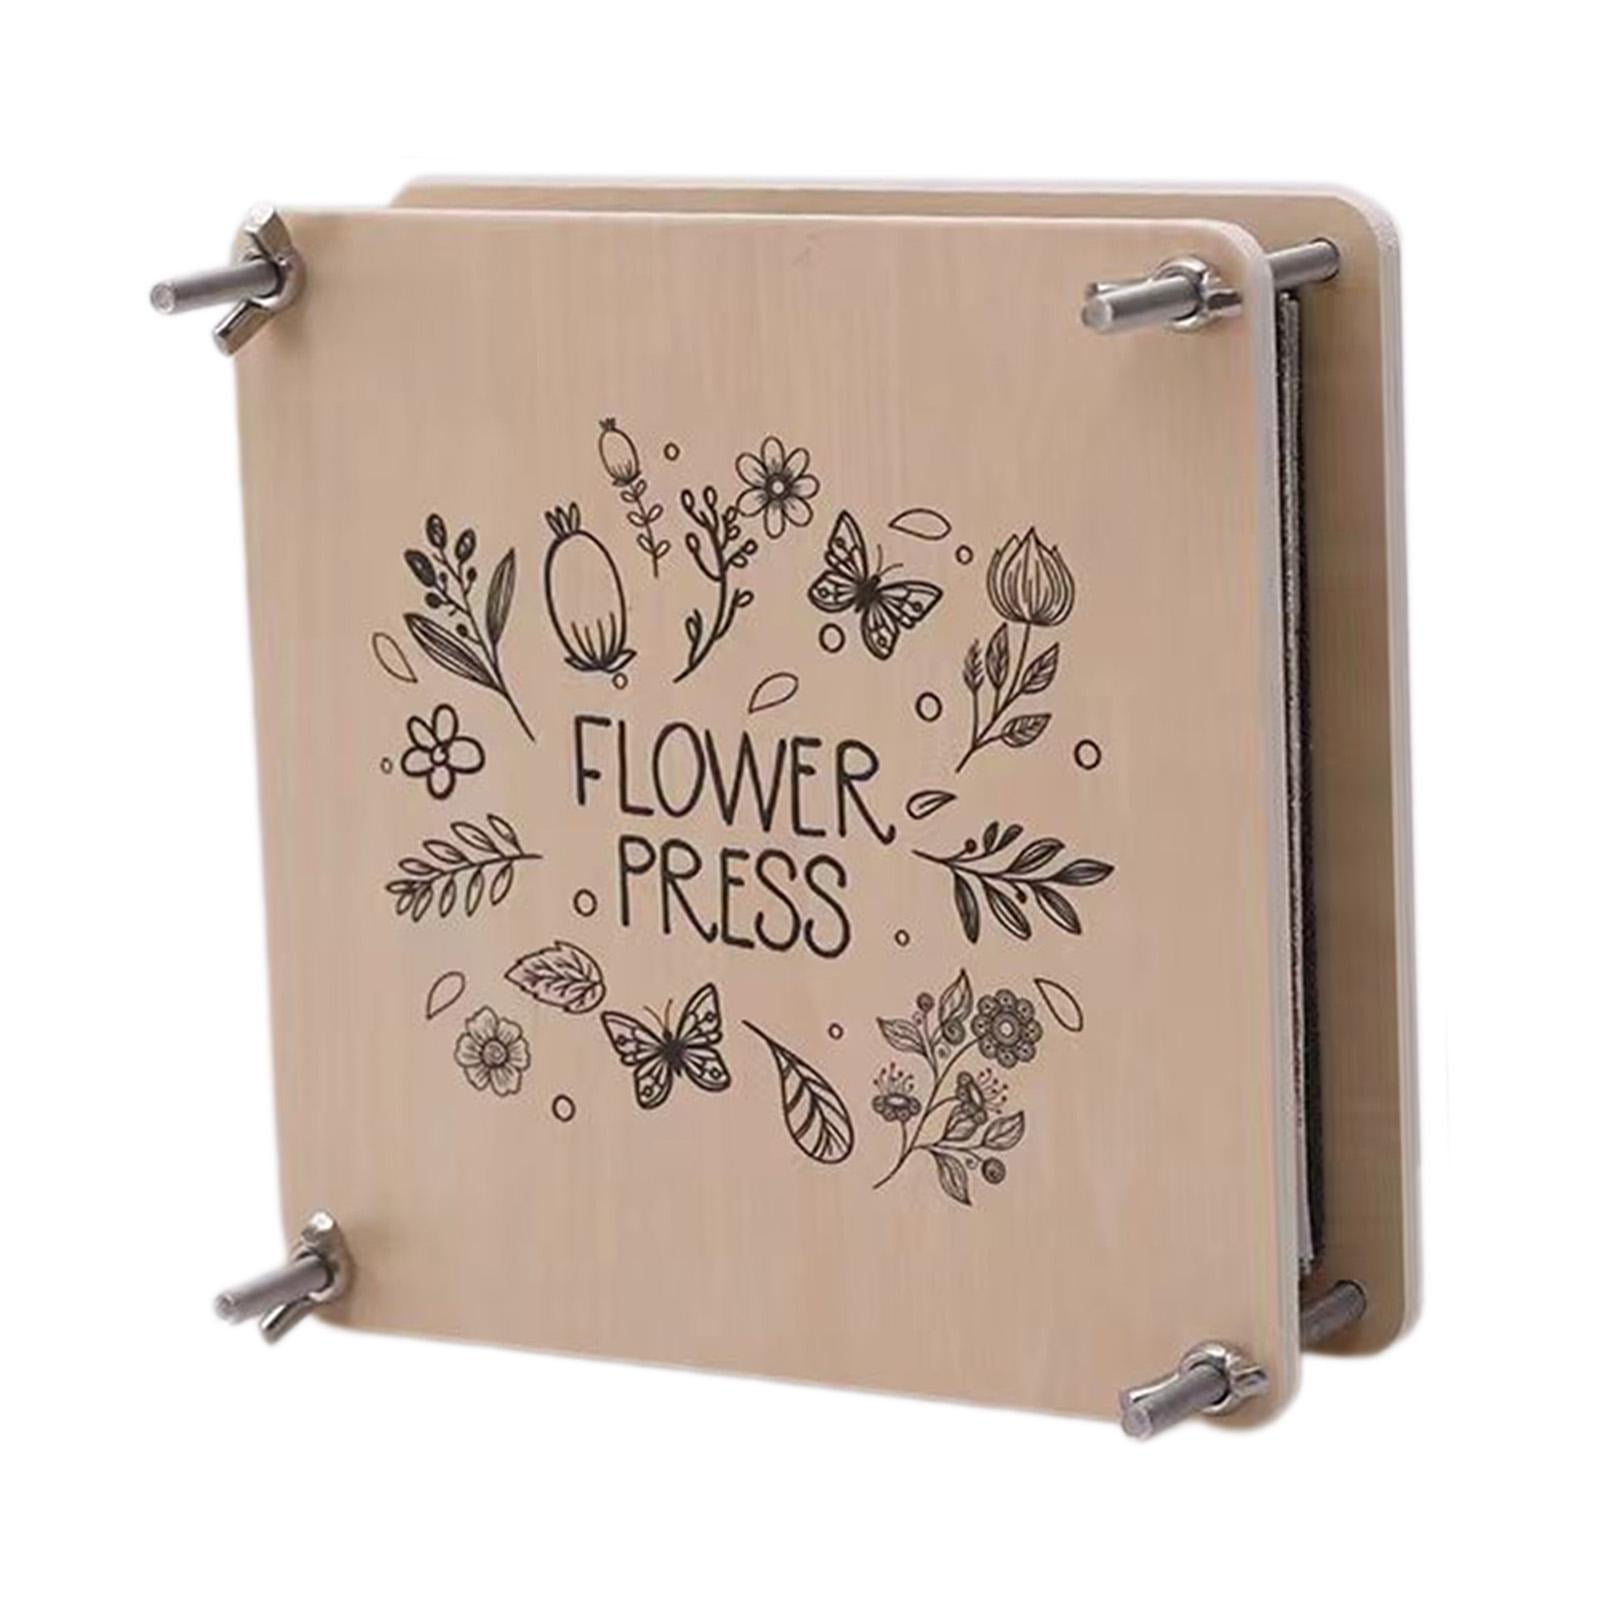 Microwave Flower Press, Quickly Flower Pressing Kit, 6.3 x 6.3